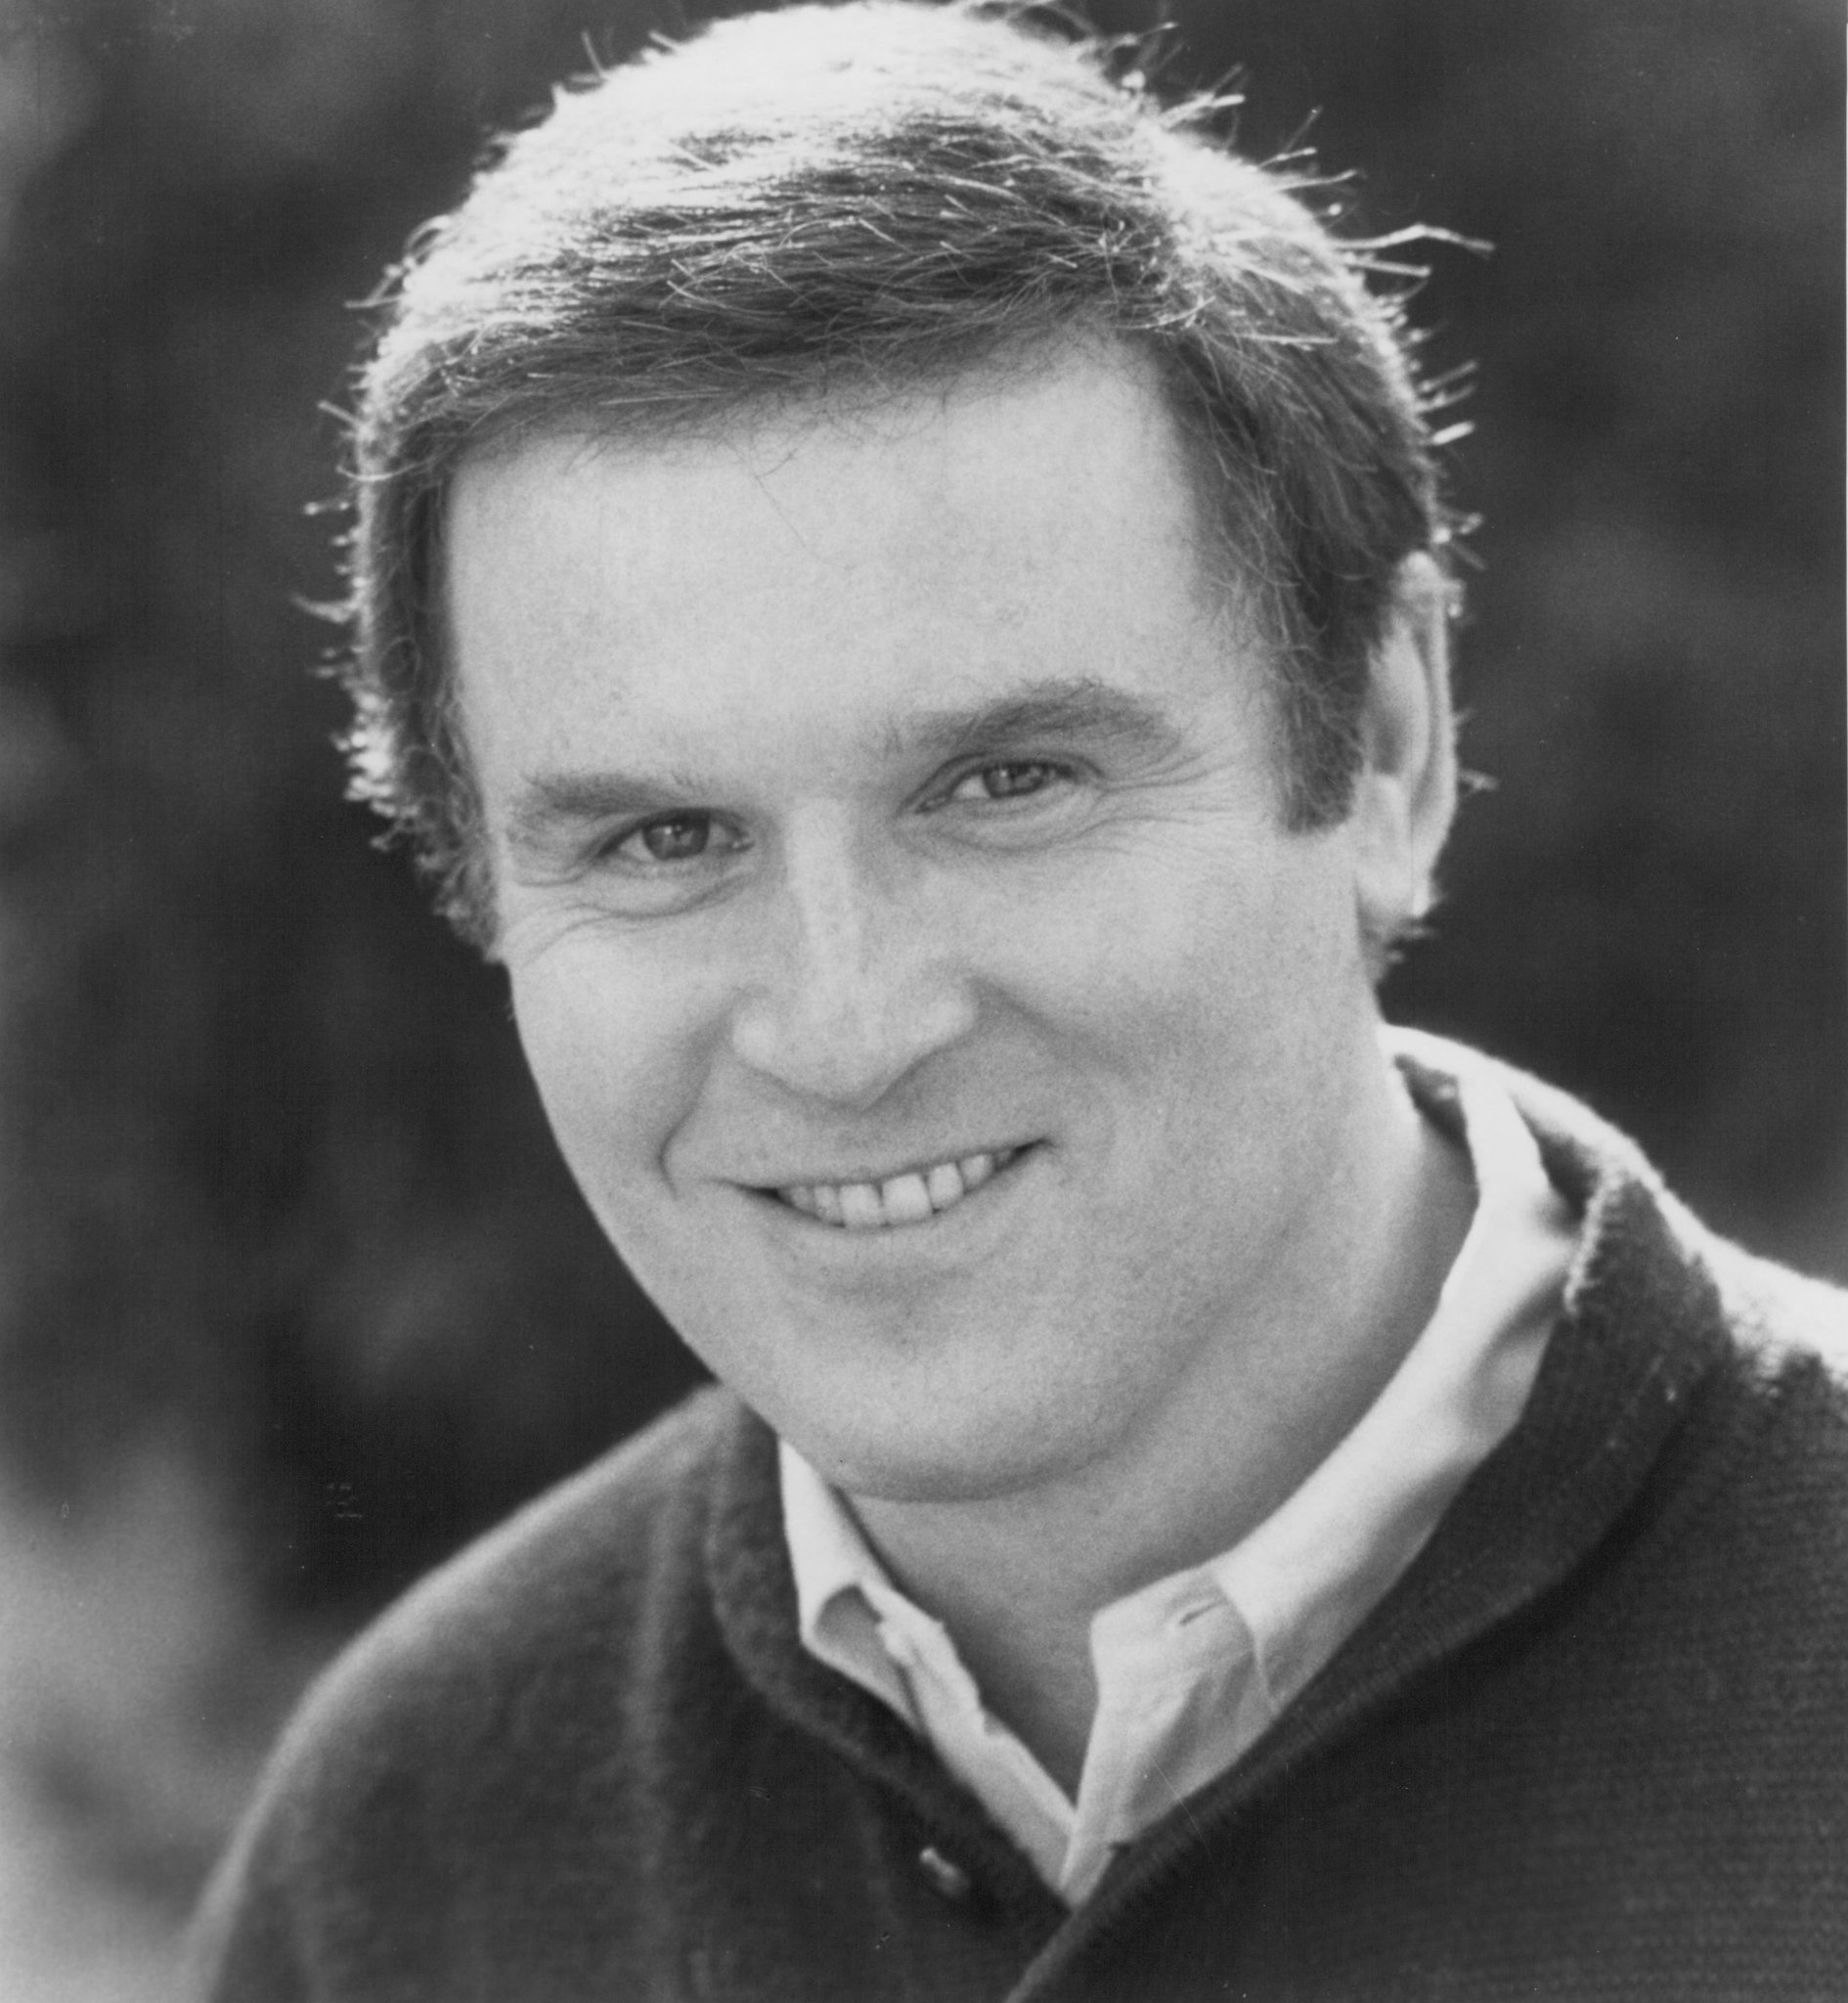 Farewell to Charles Grodin, superb in such films as "Heartbreak Kid